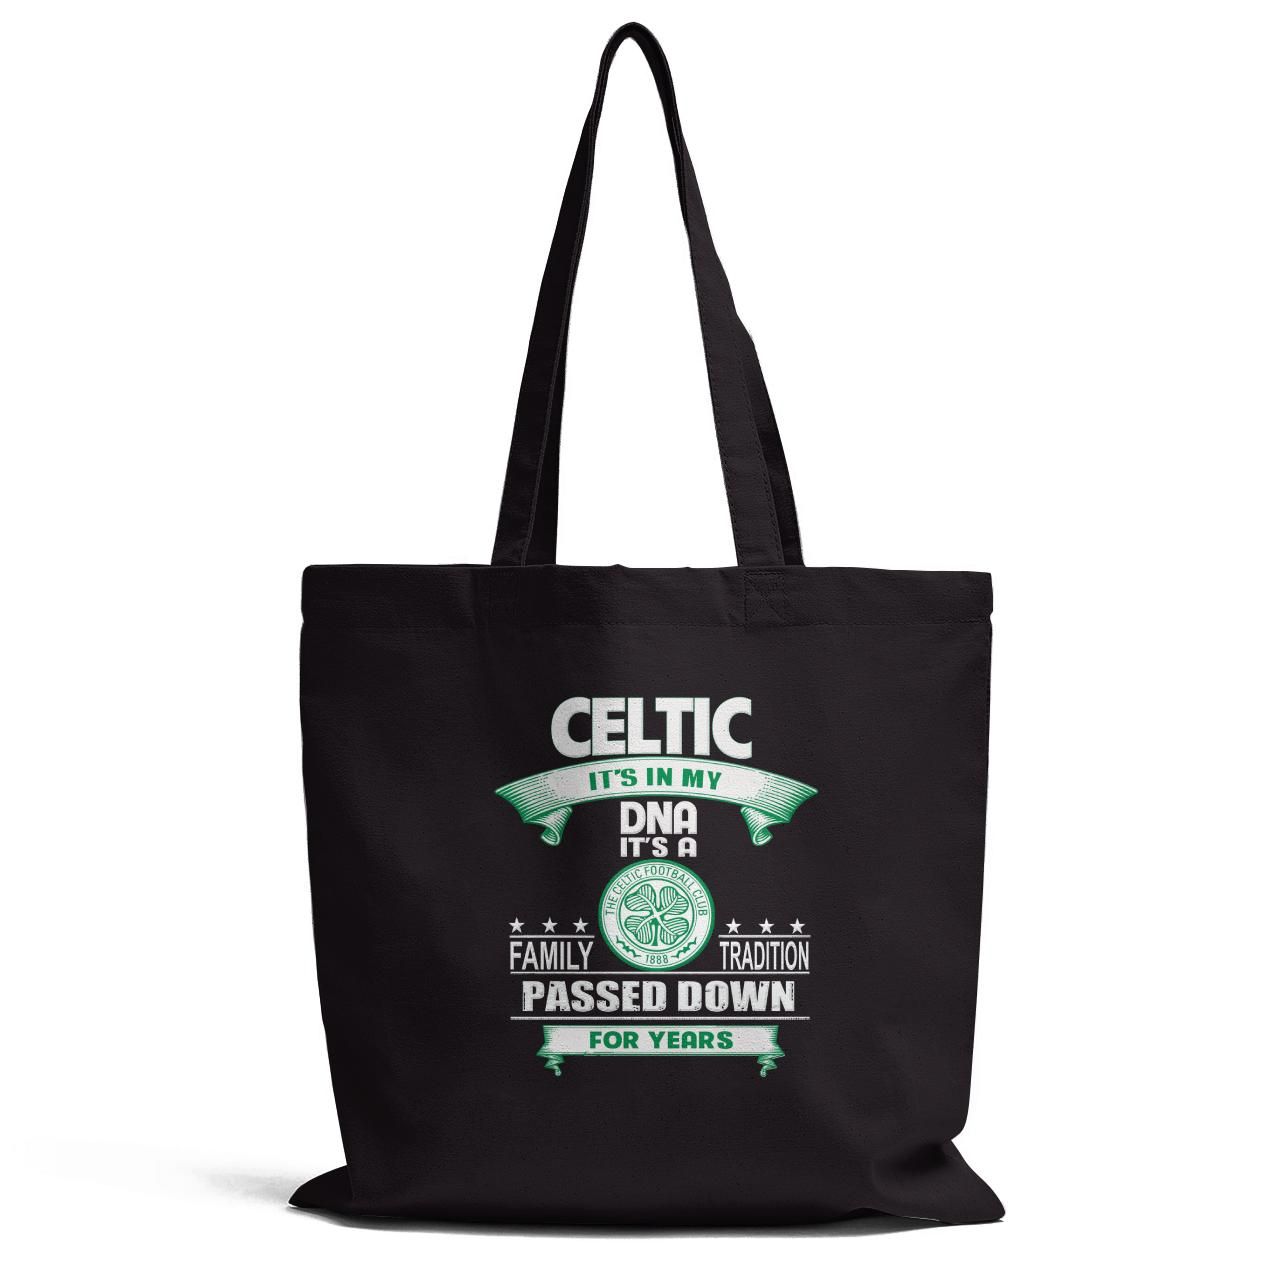 Celtic It Is My Dna Family Tradition Tote Bag